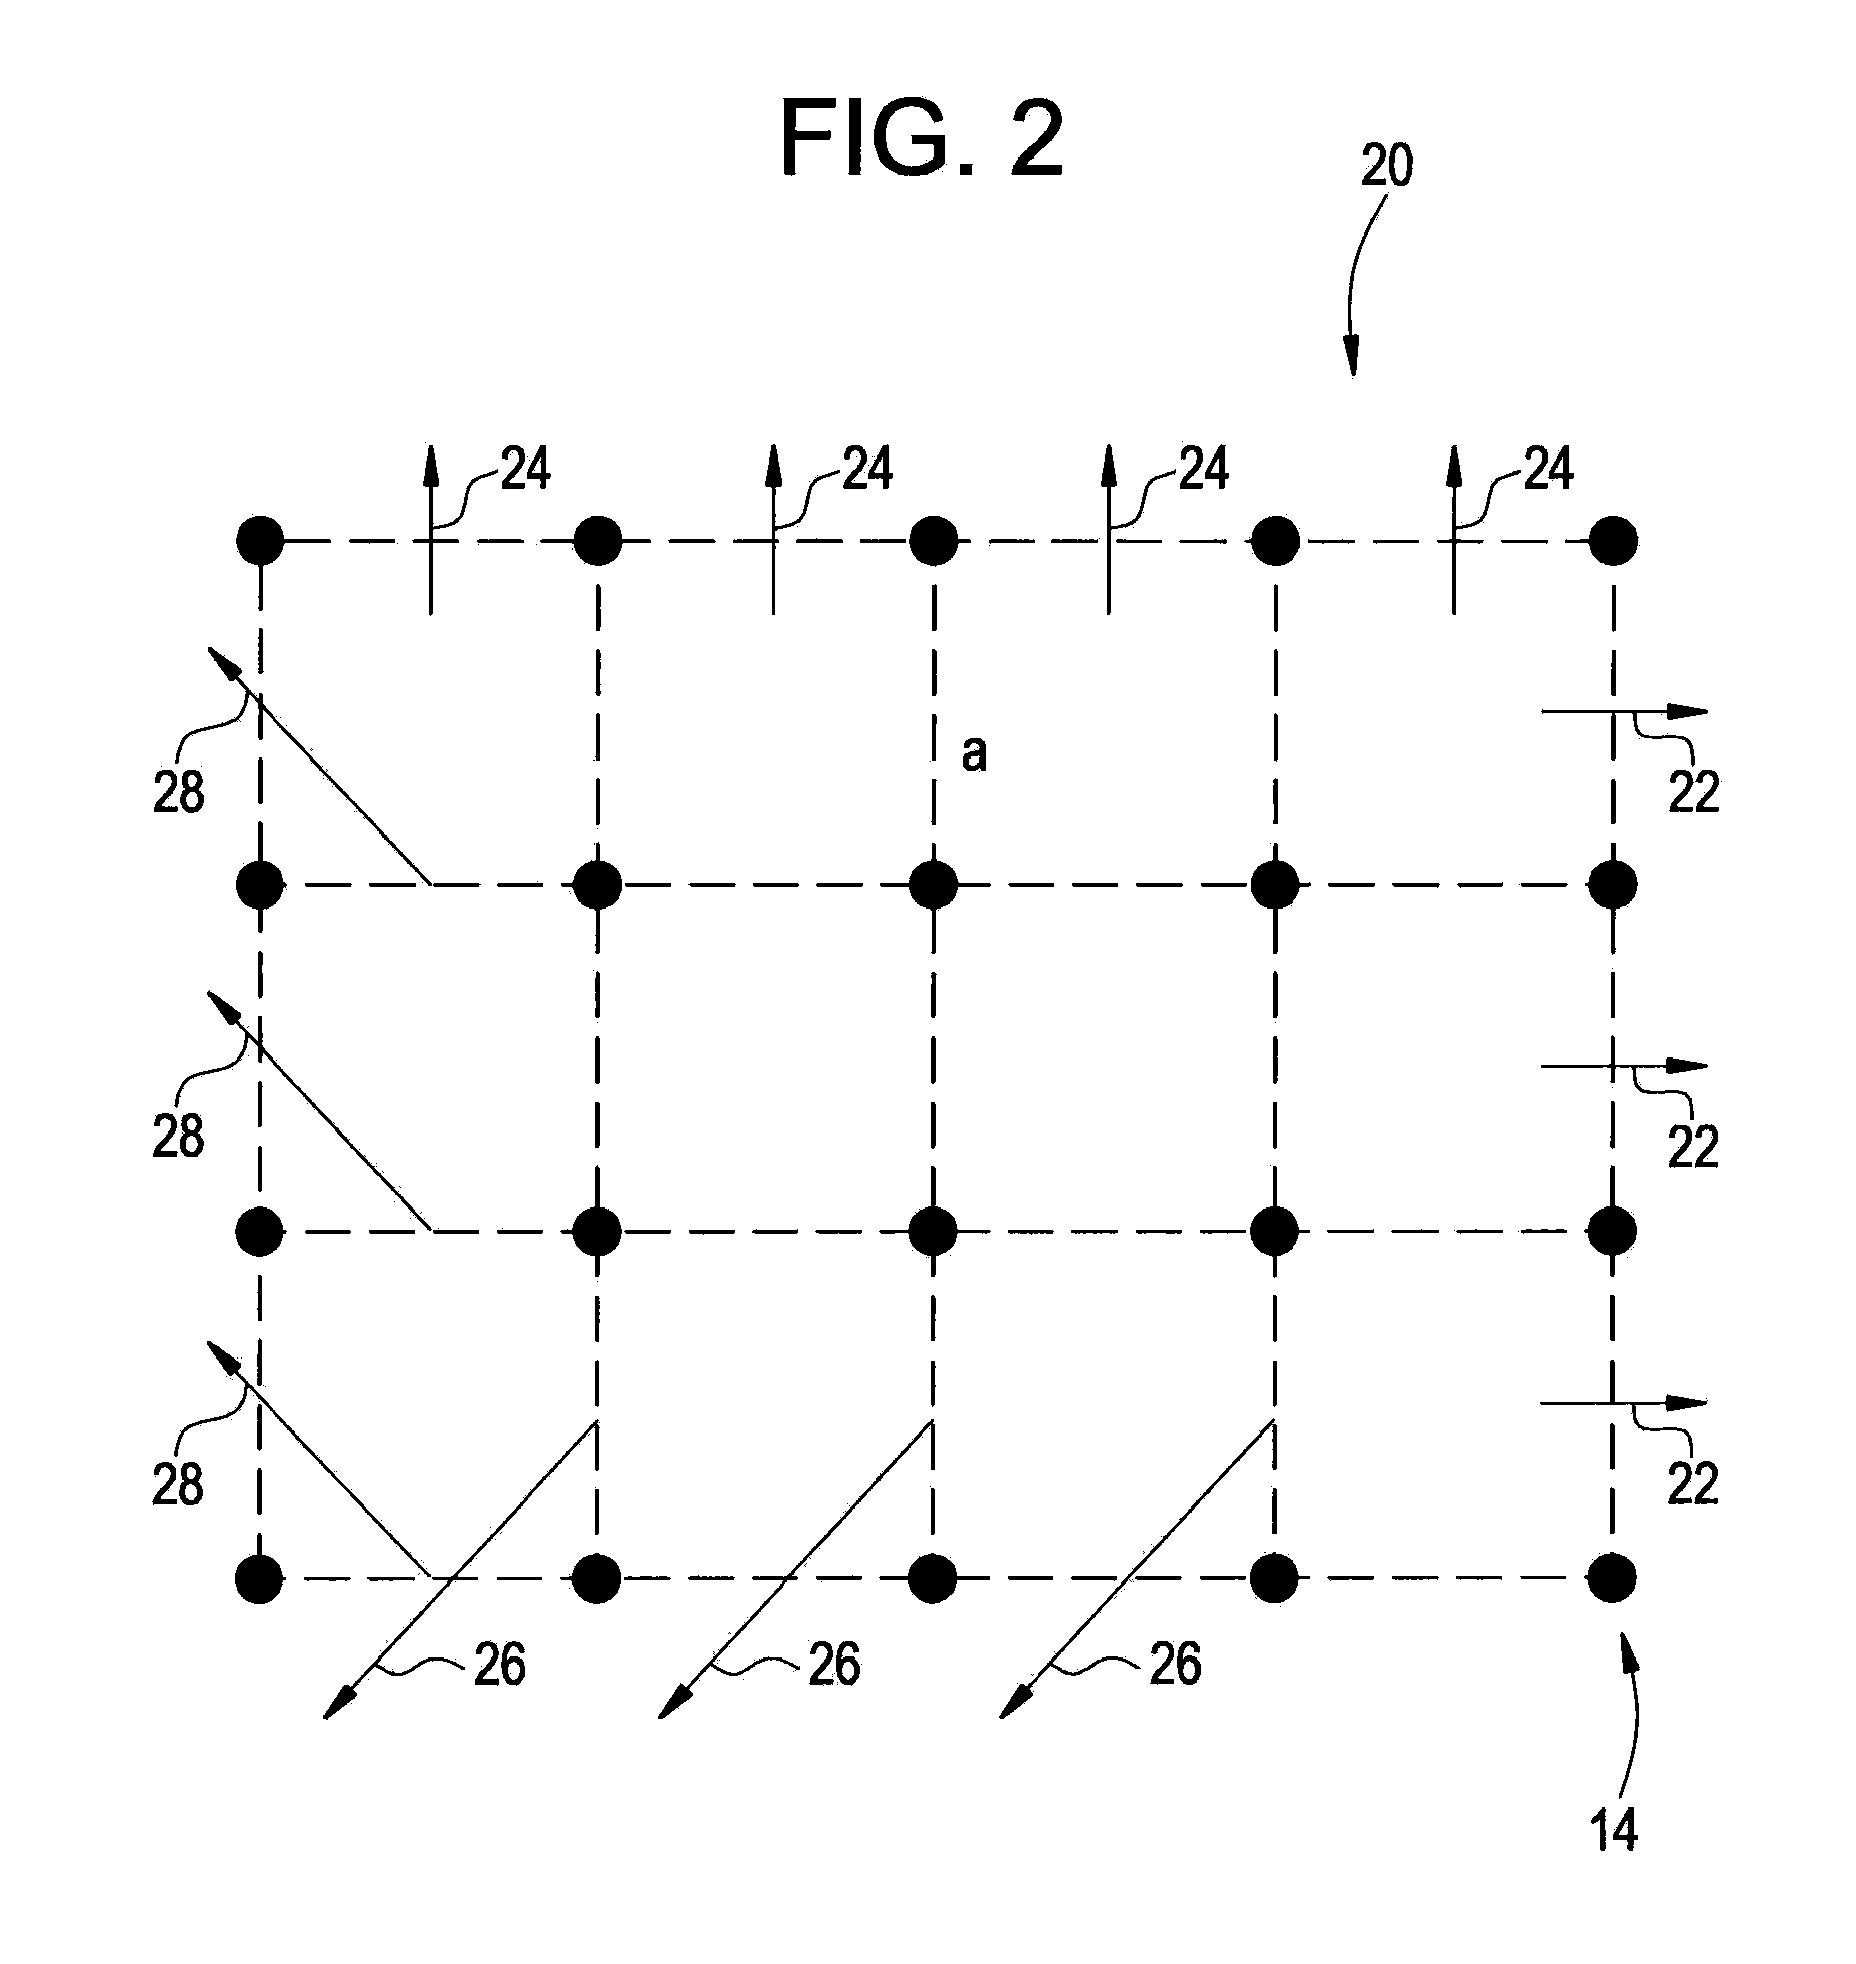 Method of Manufacture of Composite Laminates, an Assembly Therefor, and Related Articles